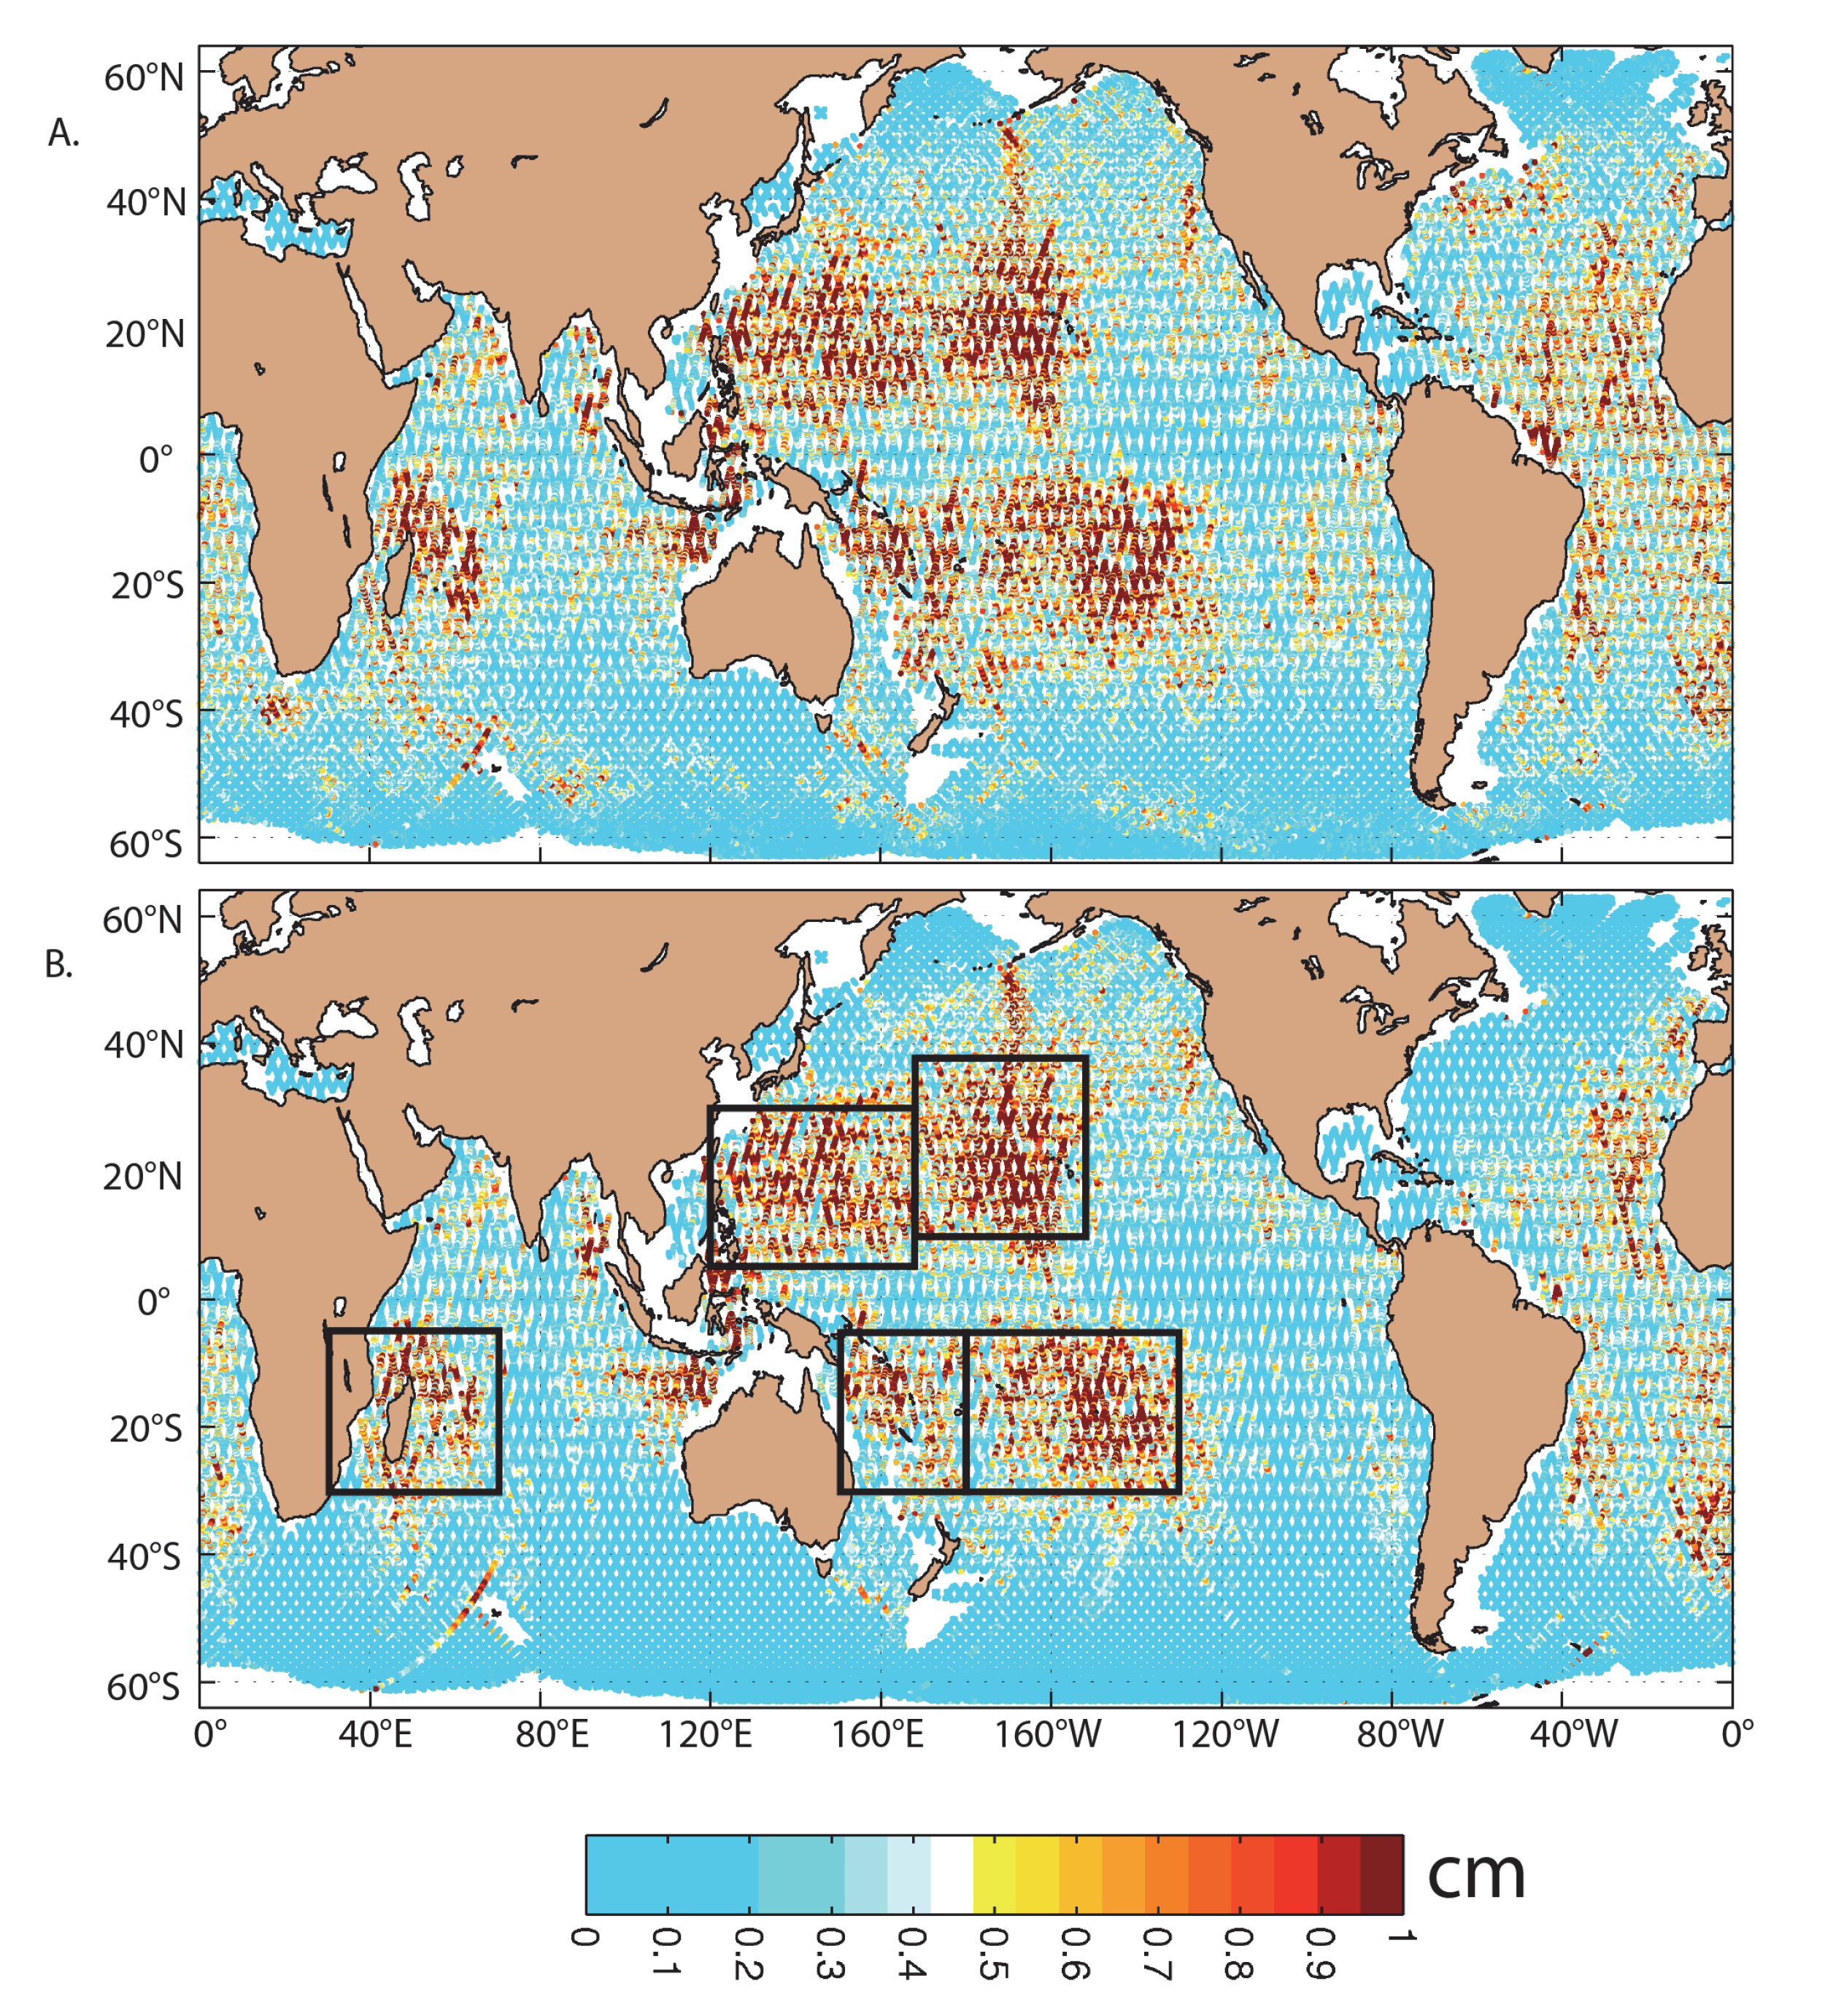 Arbic, et al Fig 13.19 from A Primer on Global Internal Tide and Internal Gravity Wave Continuum Modeling in HYCOM and MITgcm